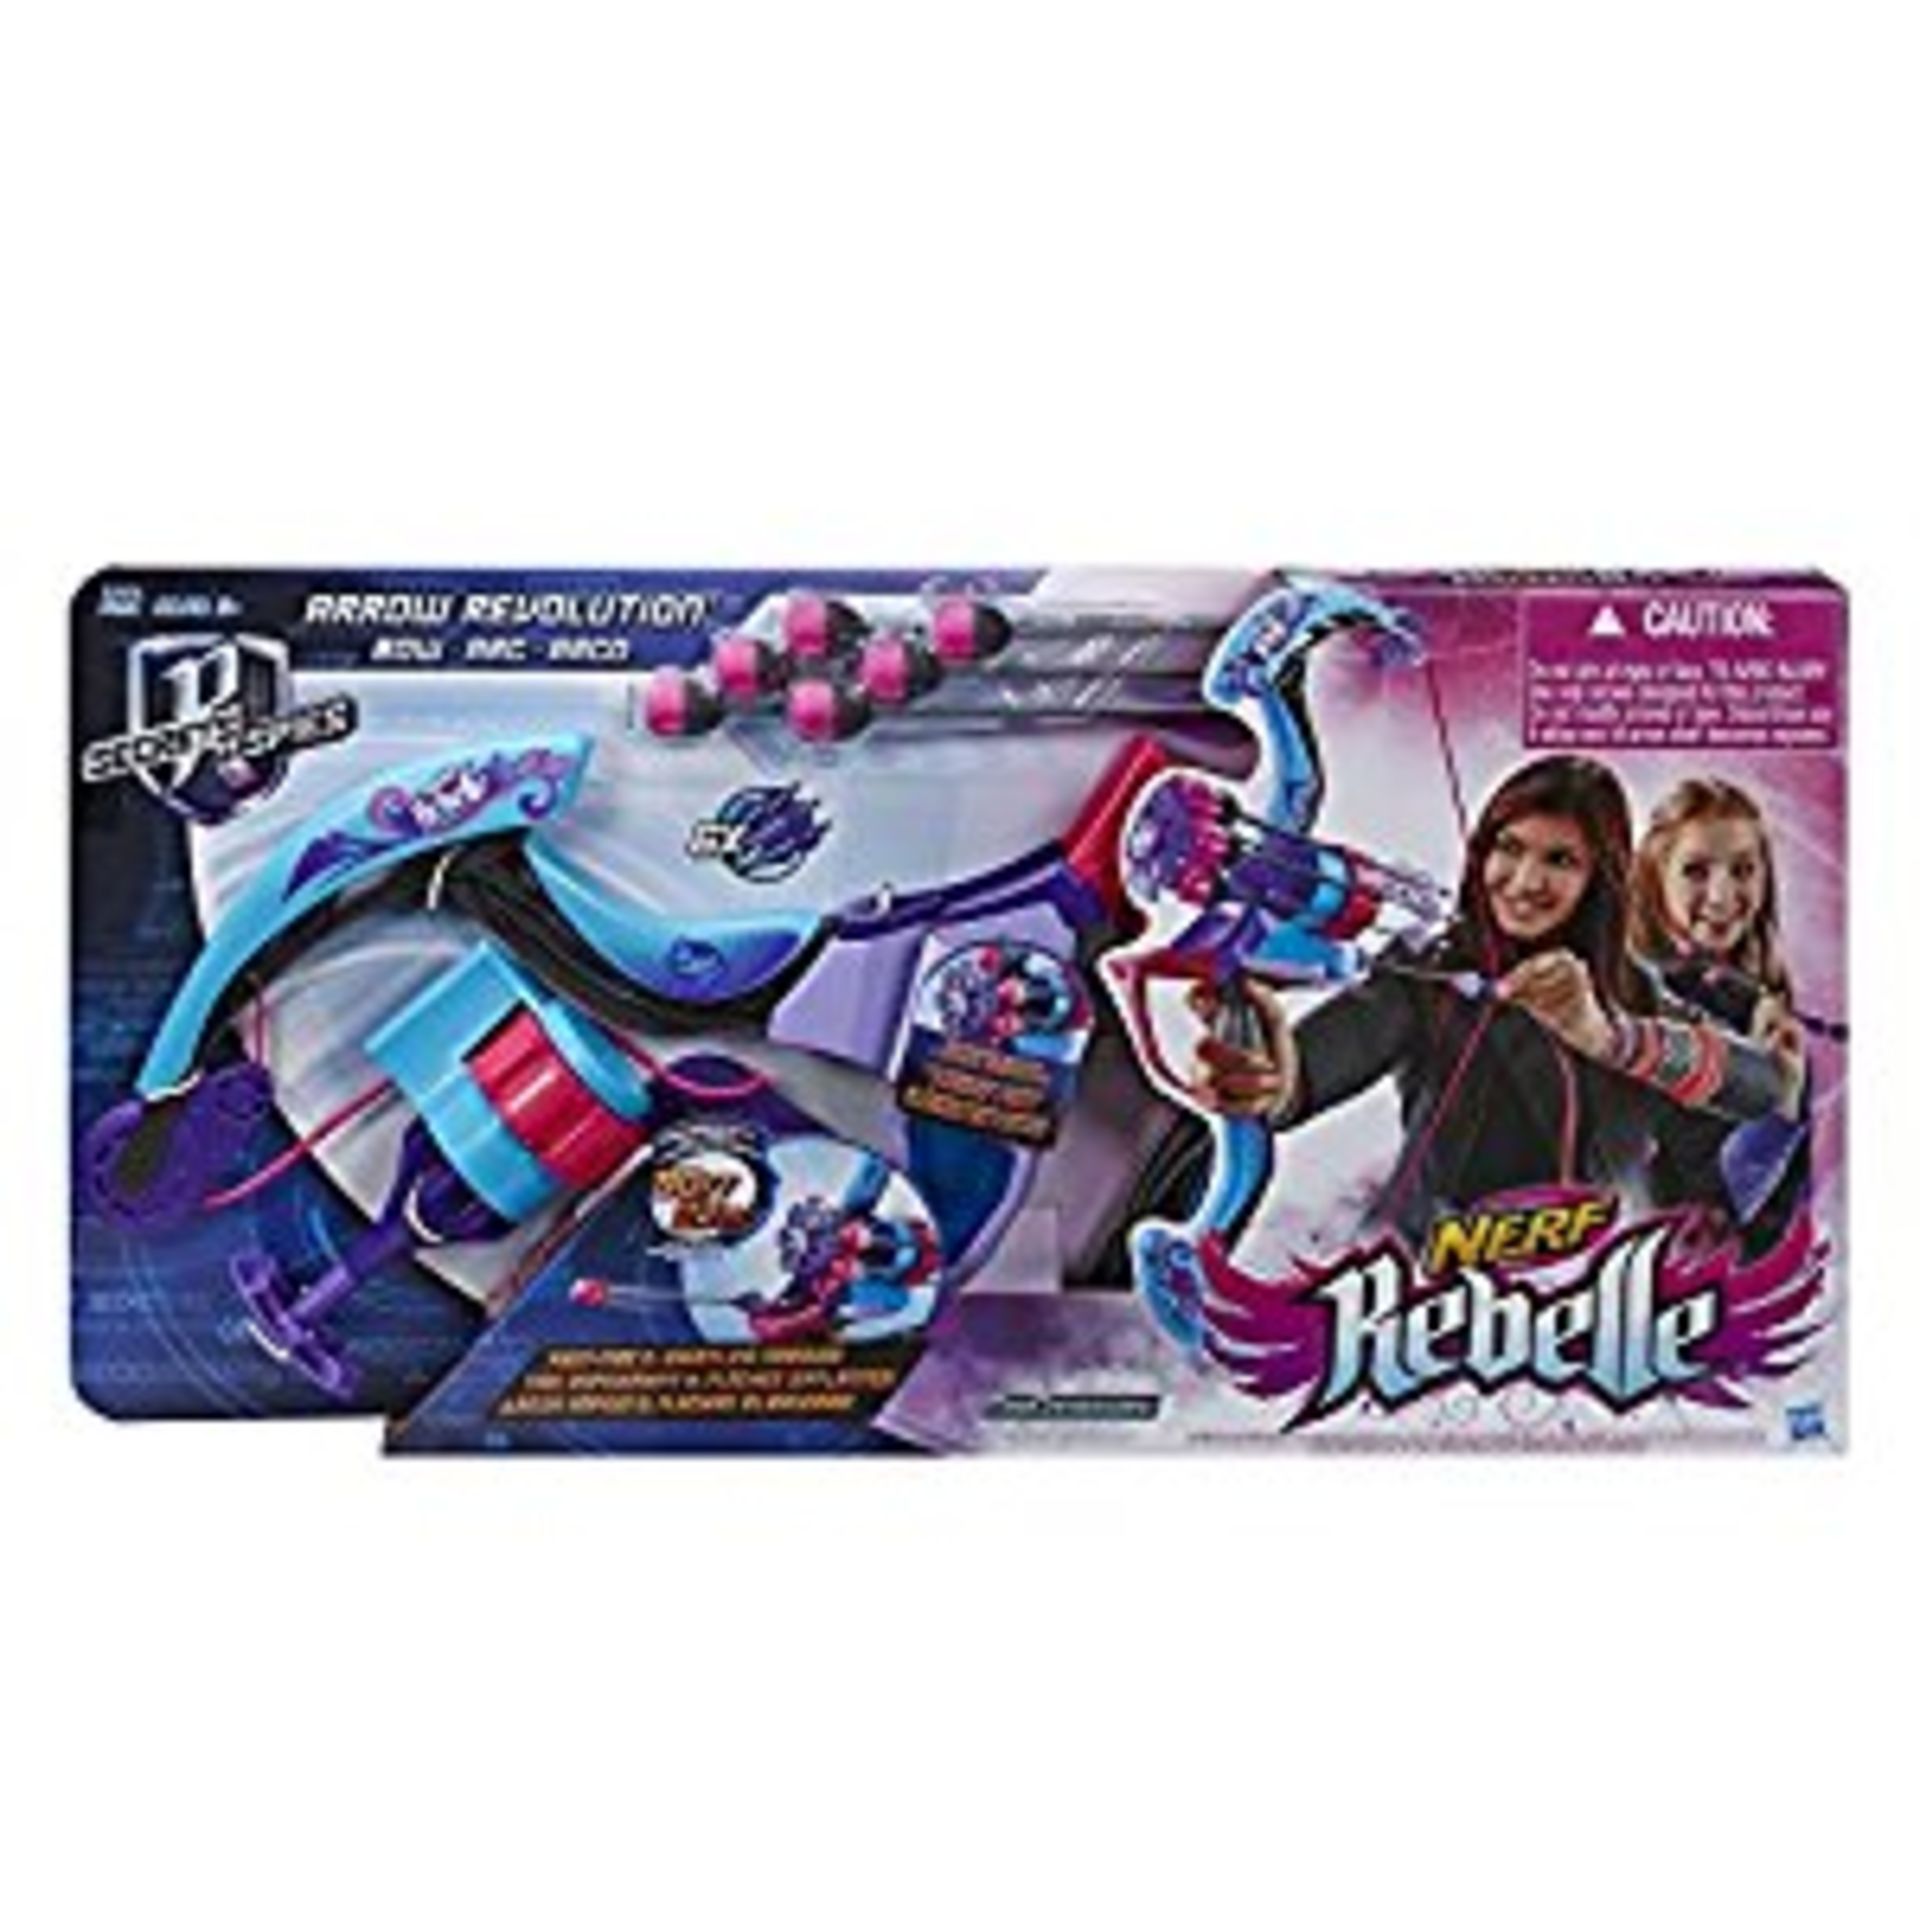 V *TRADE QTY* Brand New Hasbro Nerf Rebelle Arrow Revolution Bow - Fires 6 Whistling Arrows With - Image 2 of 2